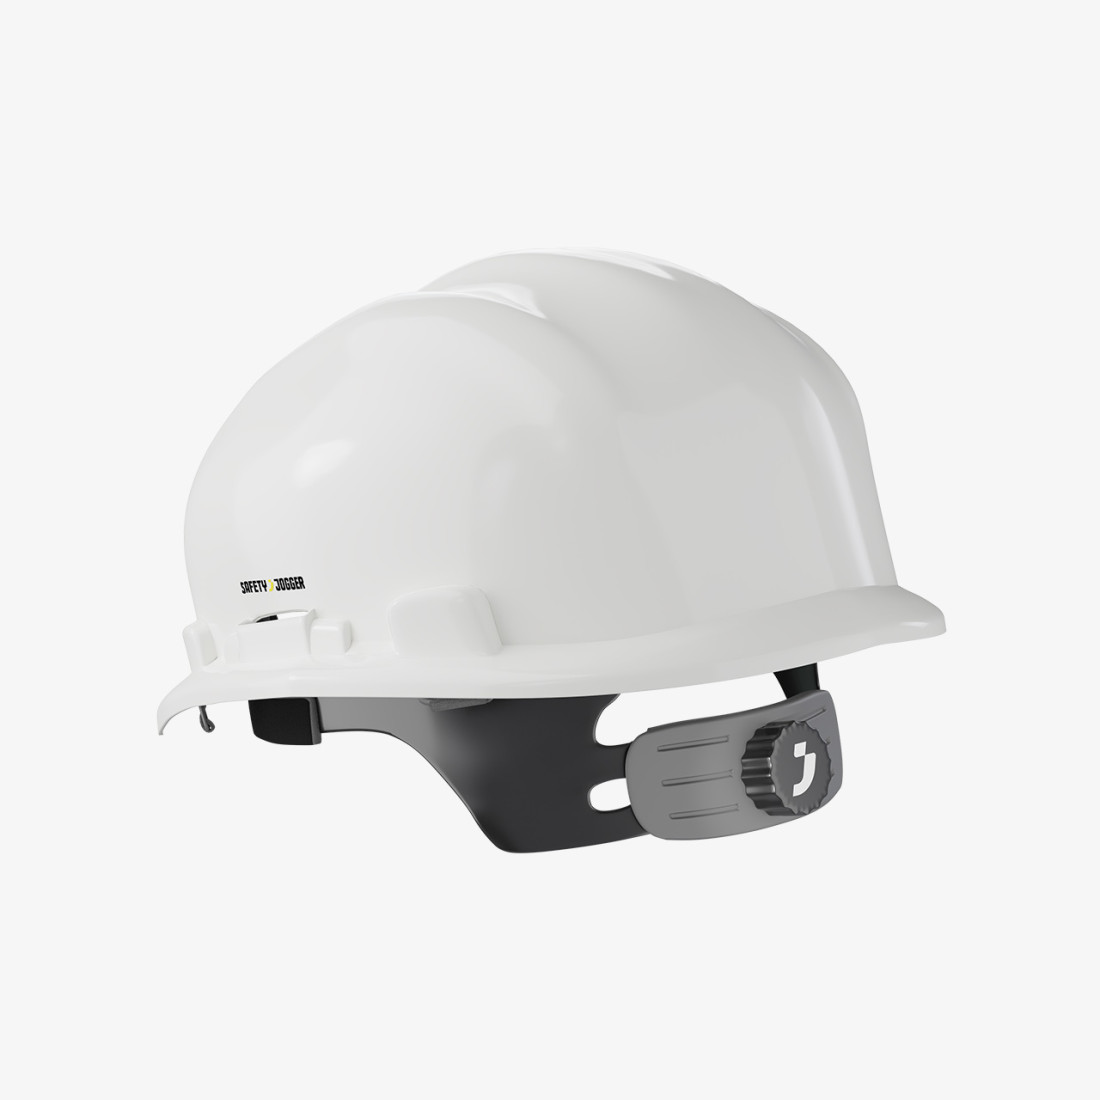 KANHAL Lightweight Safety Helmet - Personal protection